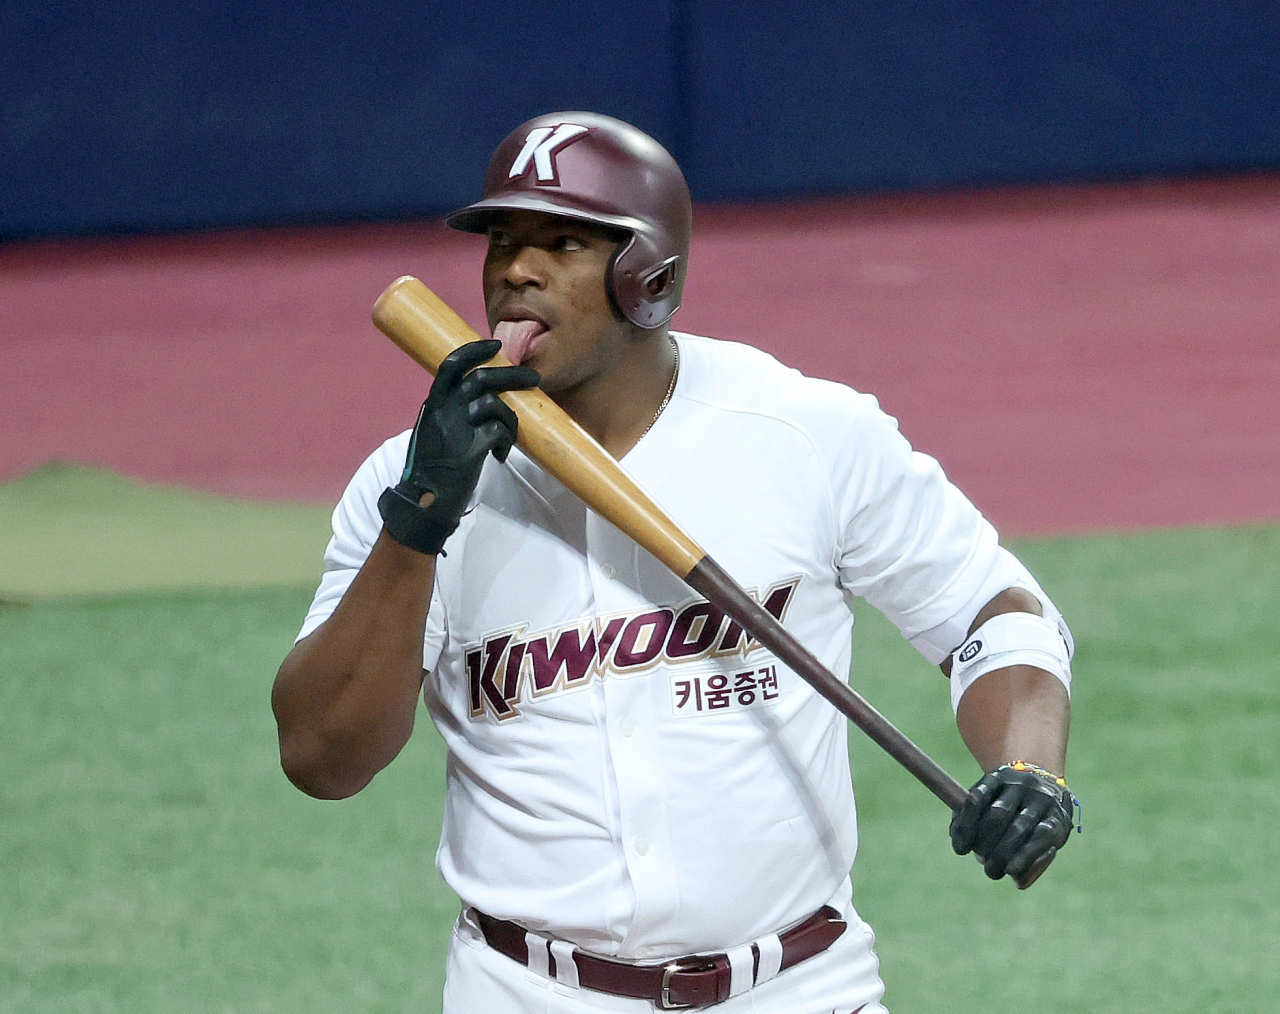 Yasiel Puig of the Kiwoom Heroes licks his bat before stepping into the box against the LG Twins in the bottom of the second inning of a Korea Baseball Organization preseason game at Gocheok Sky Dome in Seoul on Monday. (Yonhap)